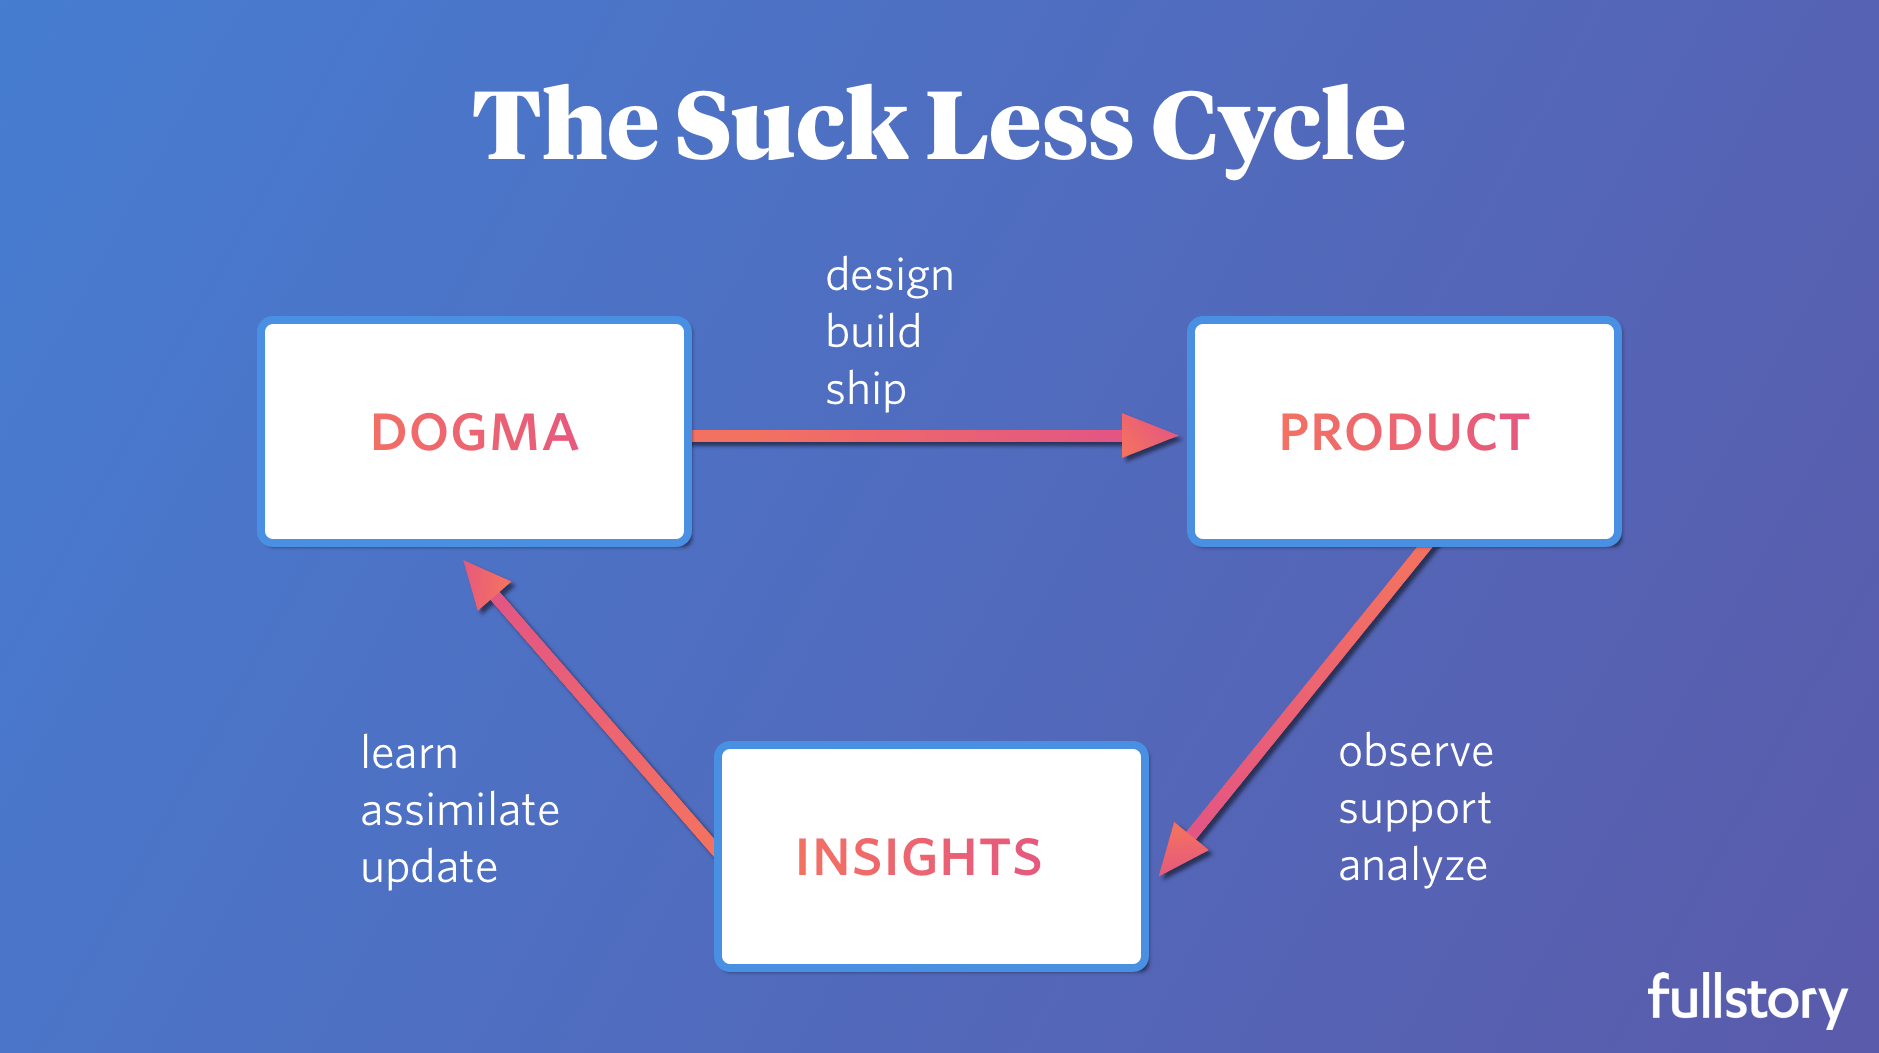 Behold, The Suck Less Cycle